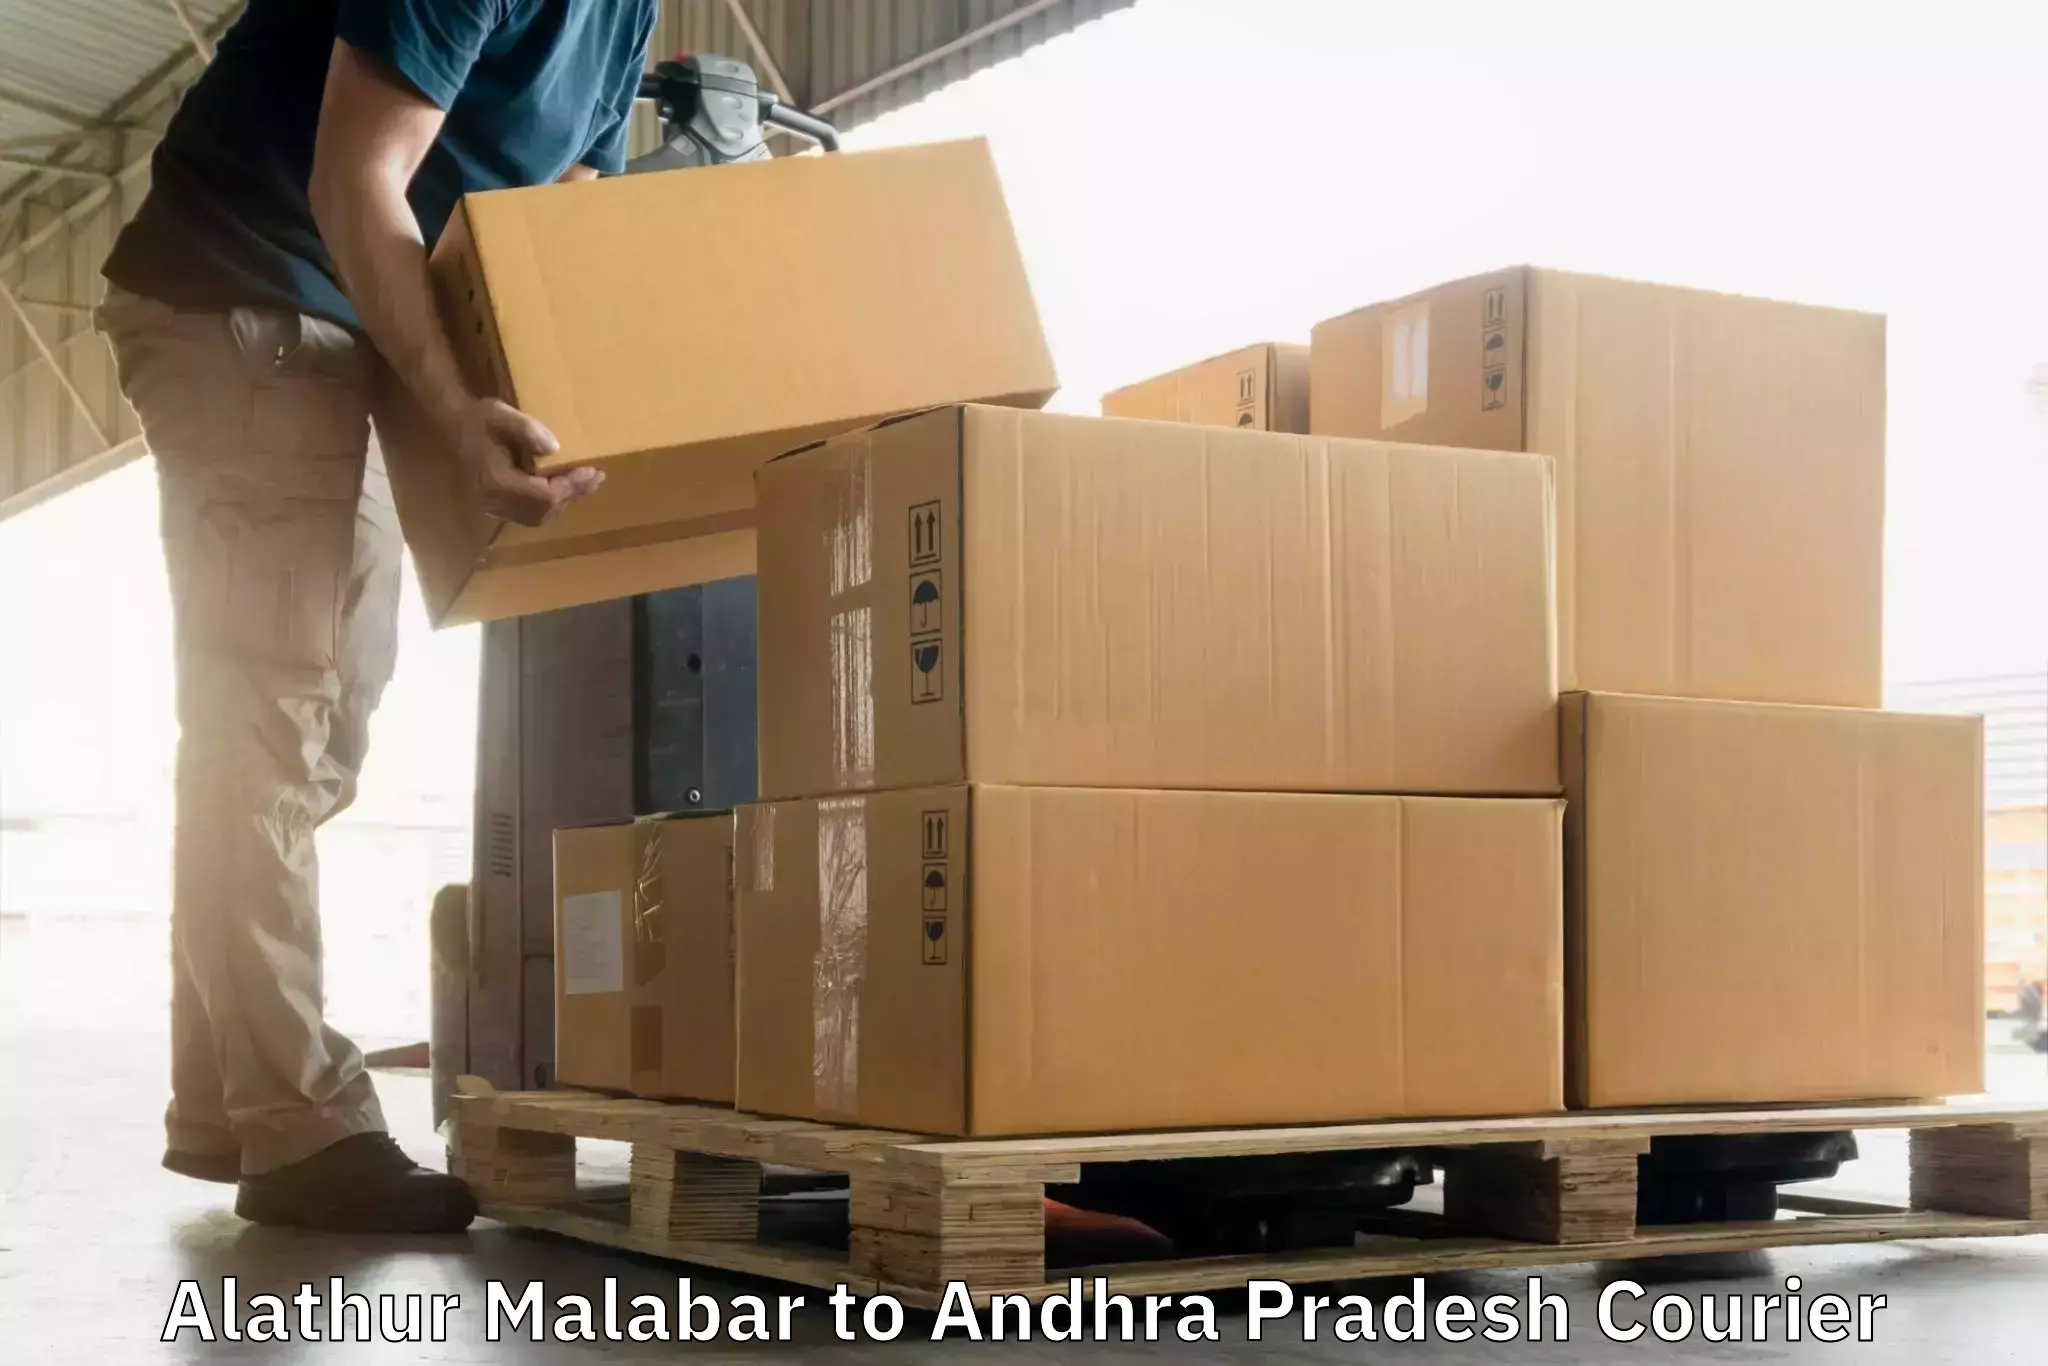 Personalized courier experiences Alathur Malabar to Alur